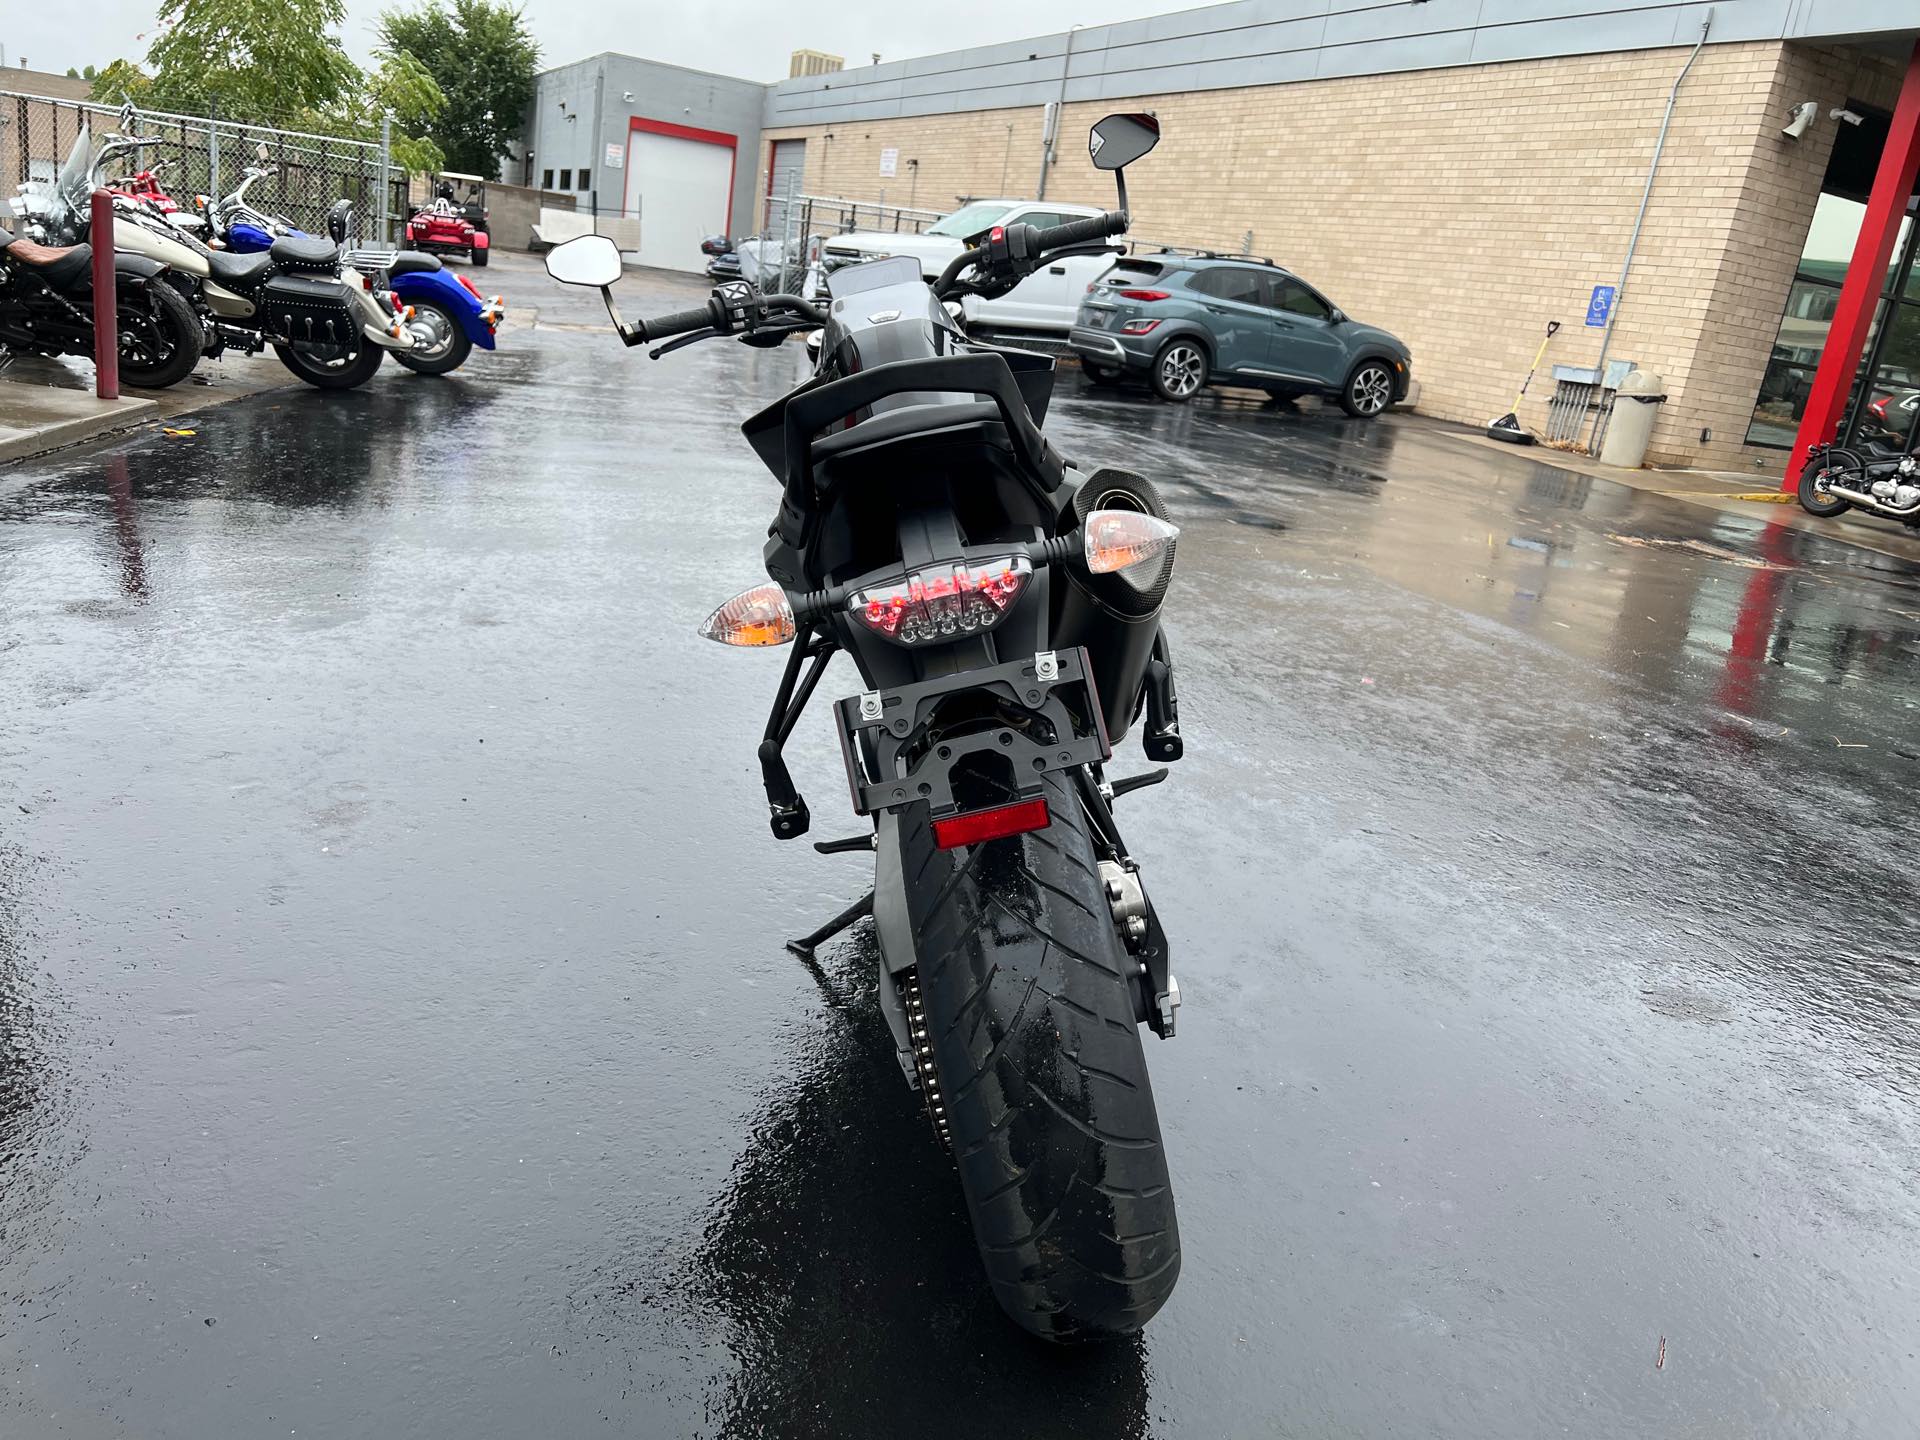 2019 KTM Duke 790 at Aces Motorcycles - Fort Collins